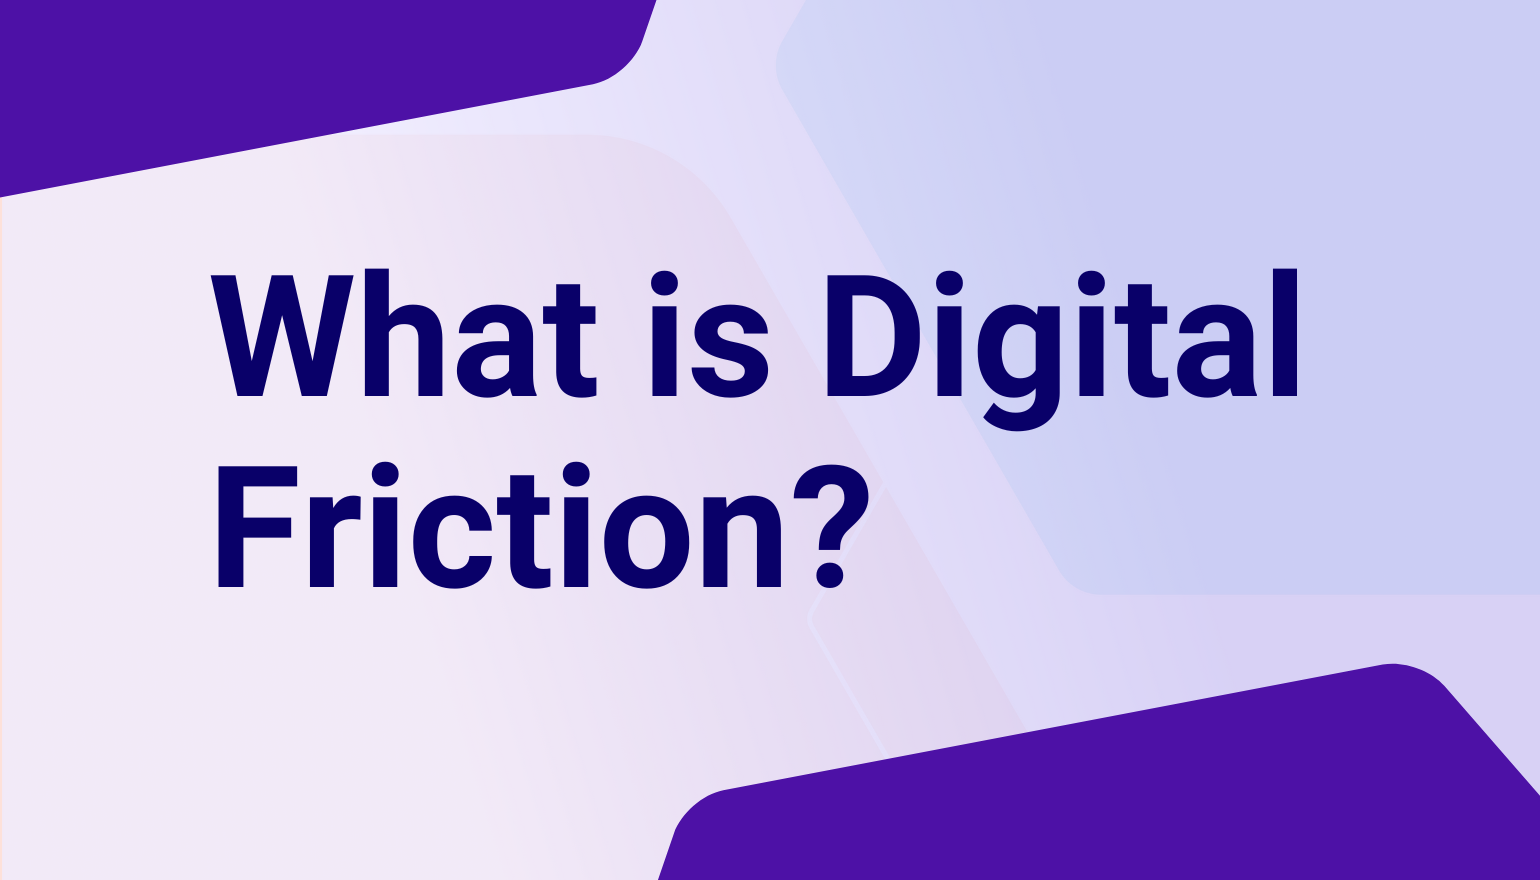 What is Digital Friction?